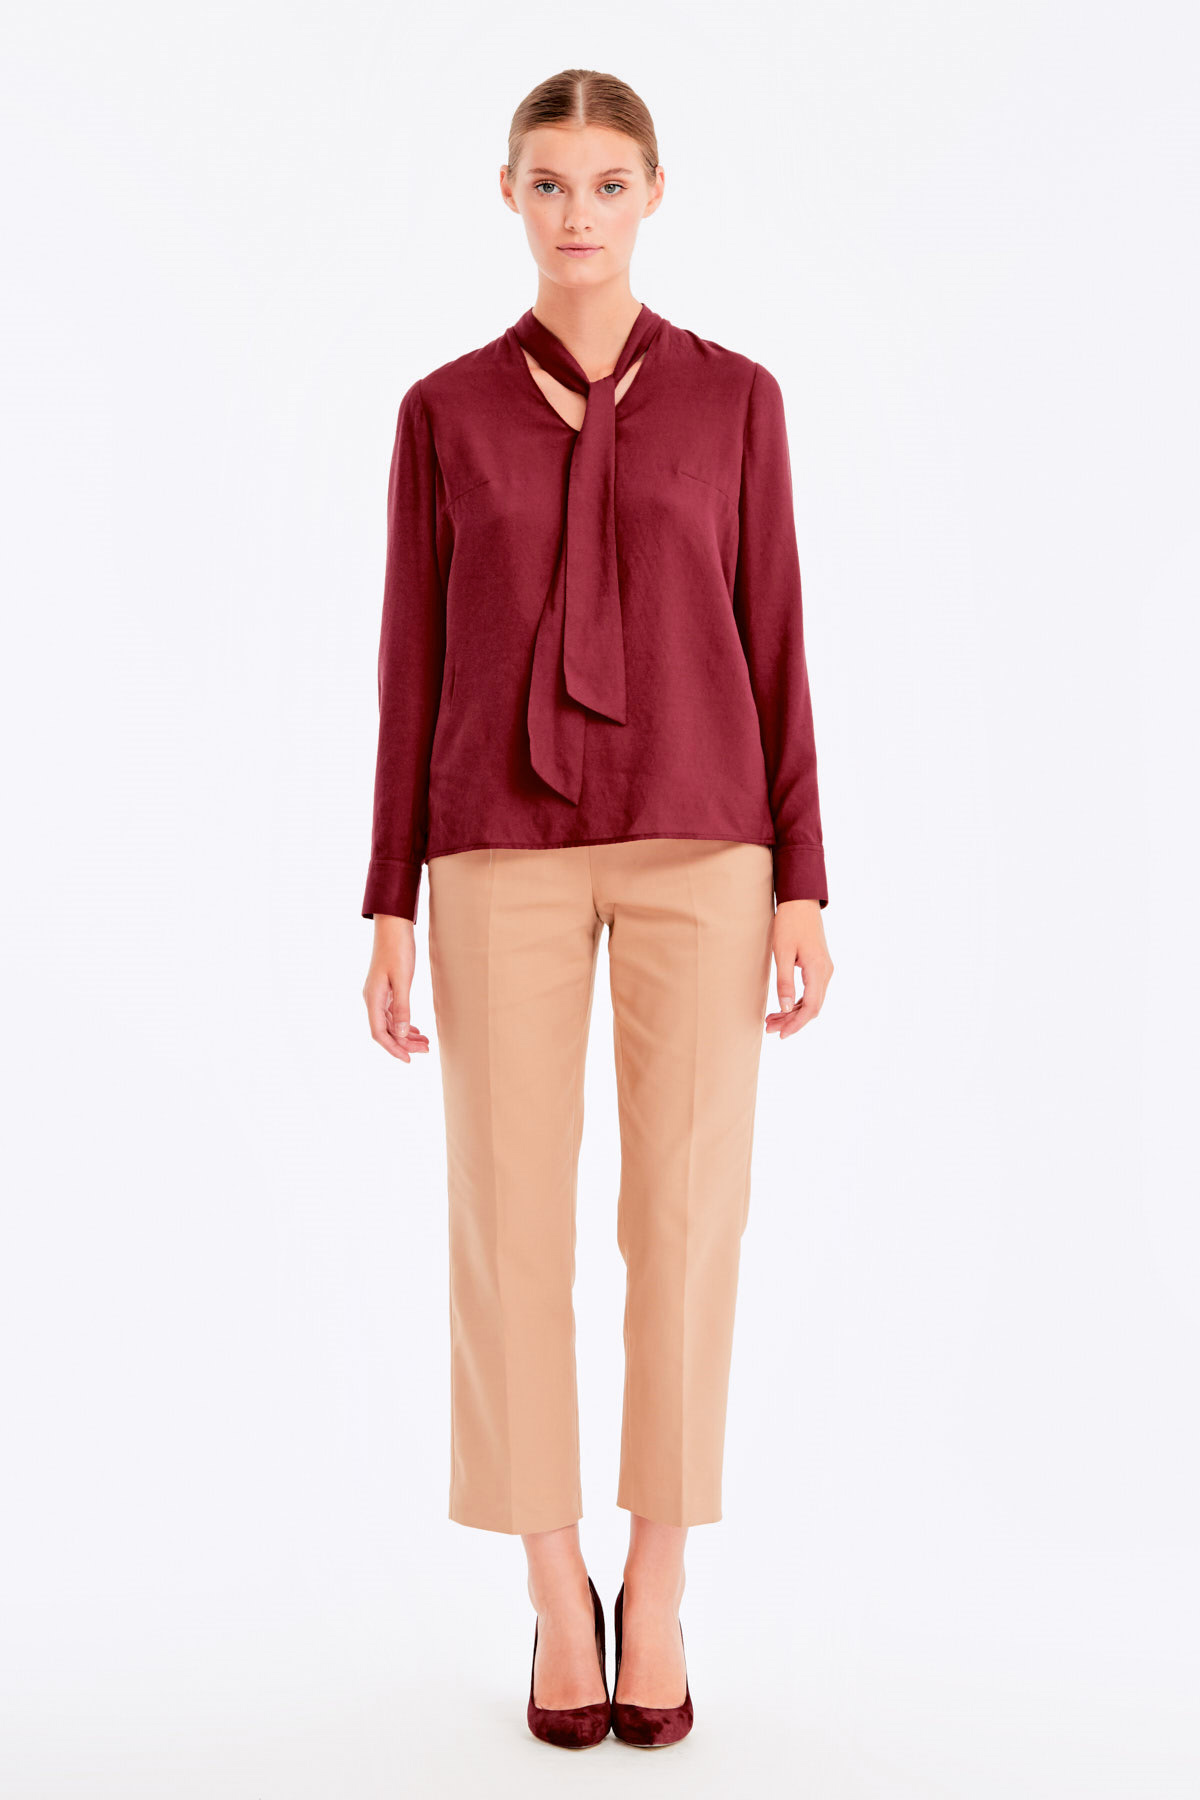 Burgundy blouse with ties, photo 3